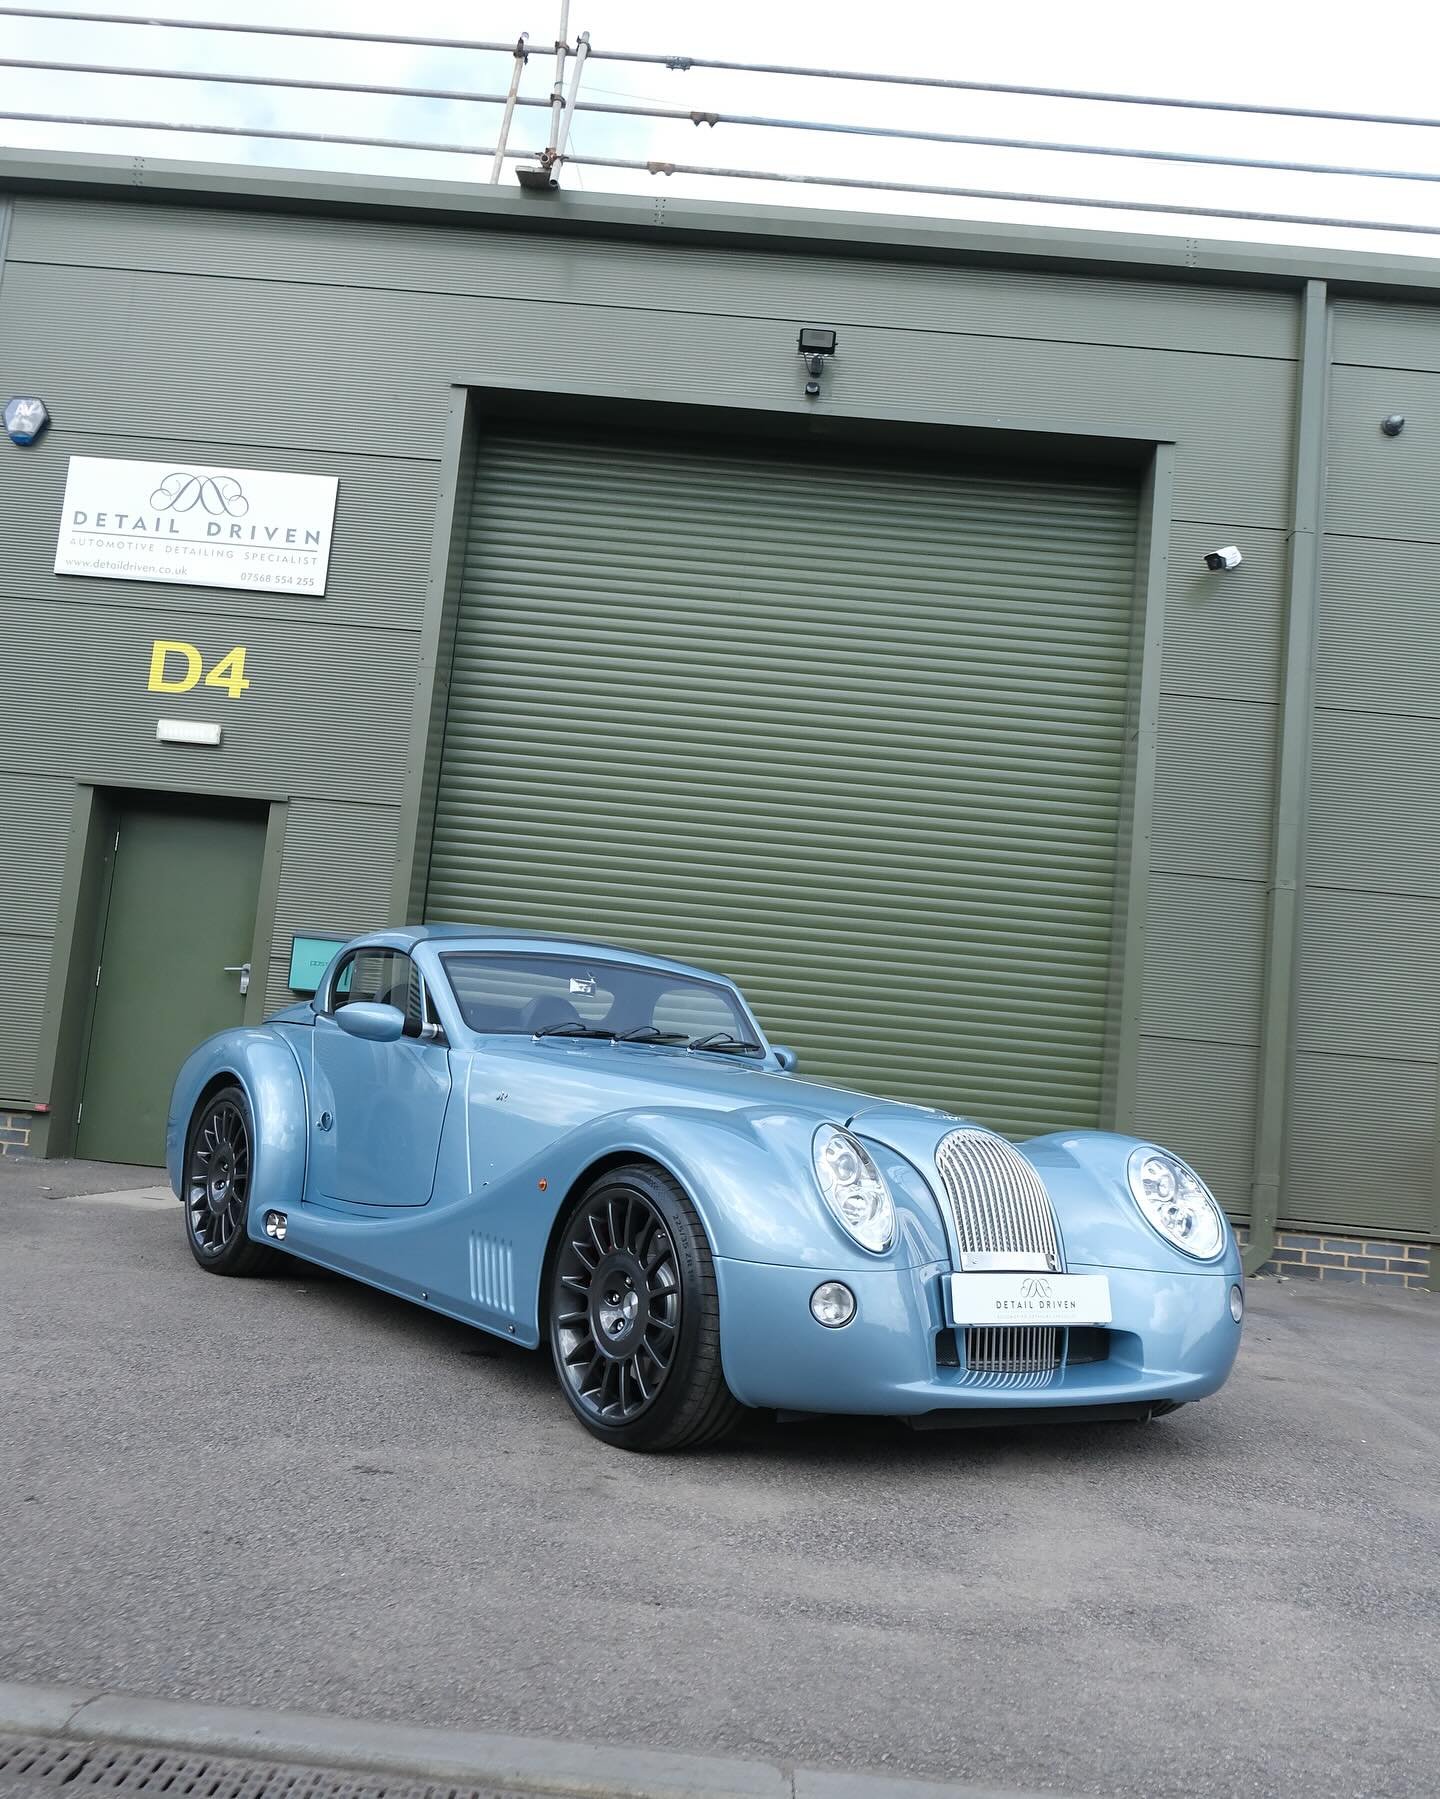 The last one ever made! One of Eight RHD hard top Morgan Aero 8 now fully protected with Modesta coatings and Windscreen PPF. Already covered with a bespoke PPF install this Morgan came to us having recently been purchased by an existing client to ha